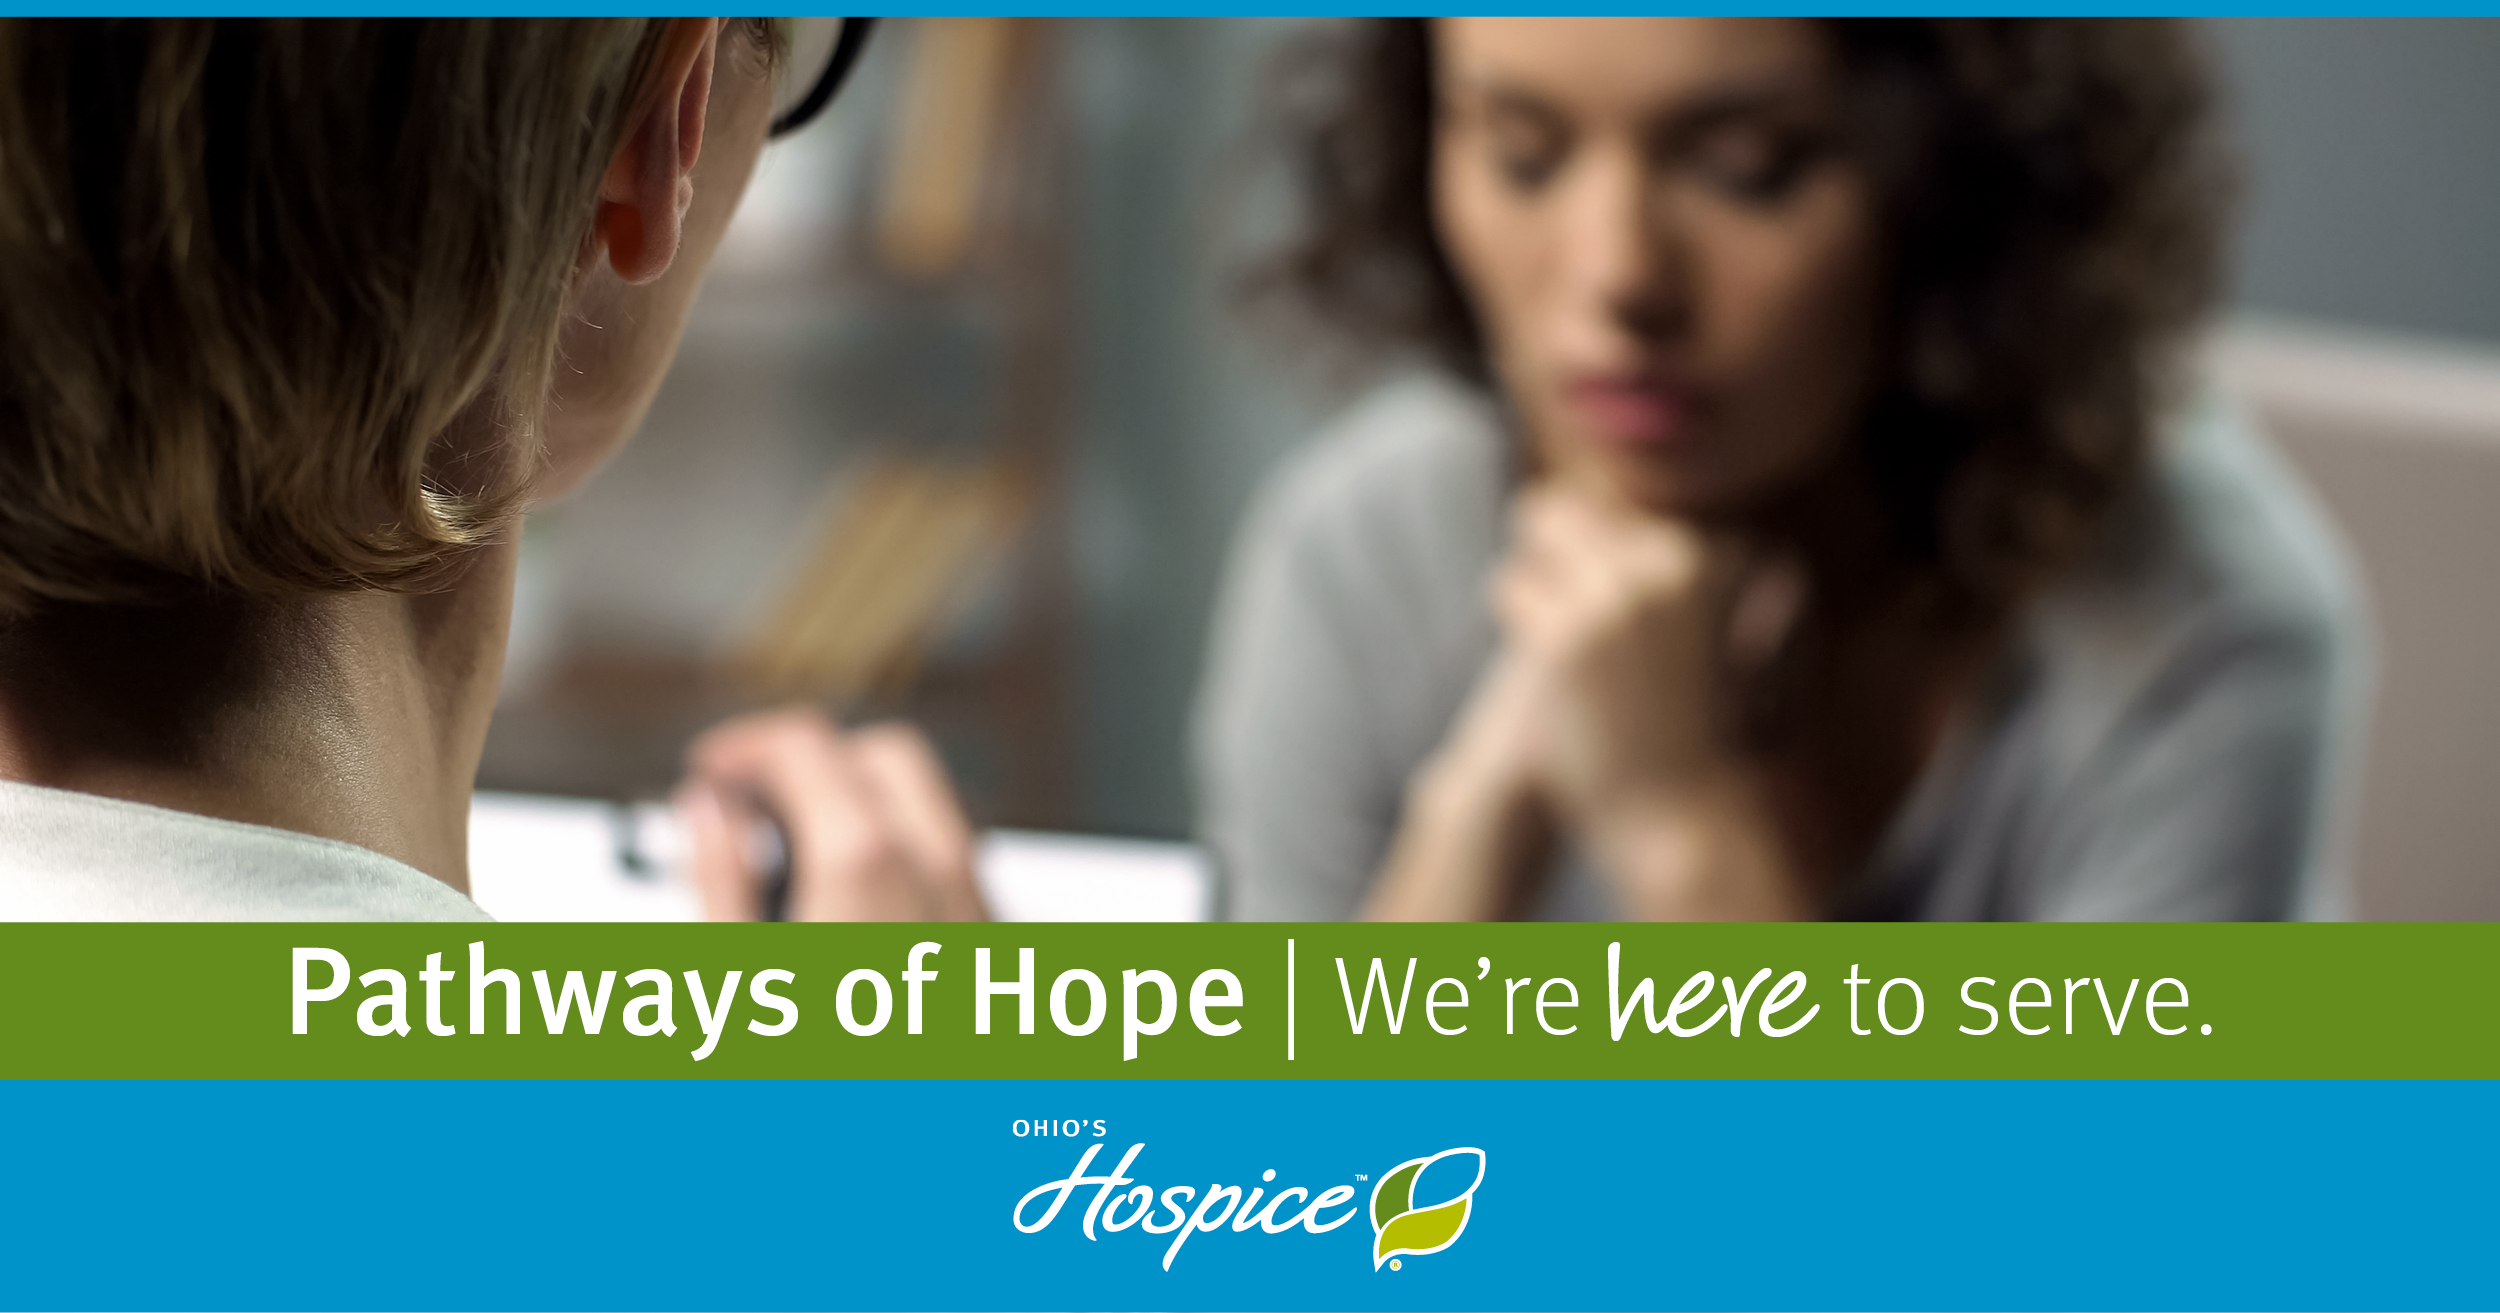 Pathways of Hope | We're here to serve.